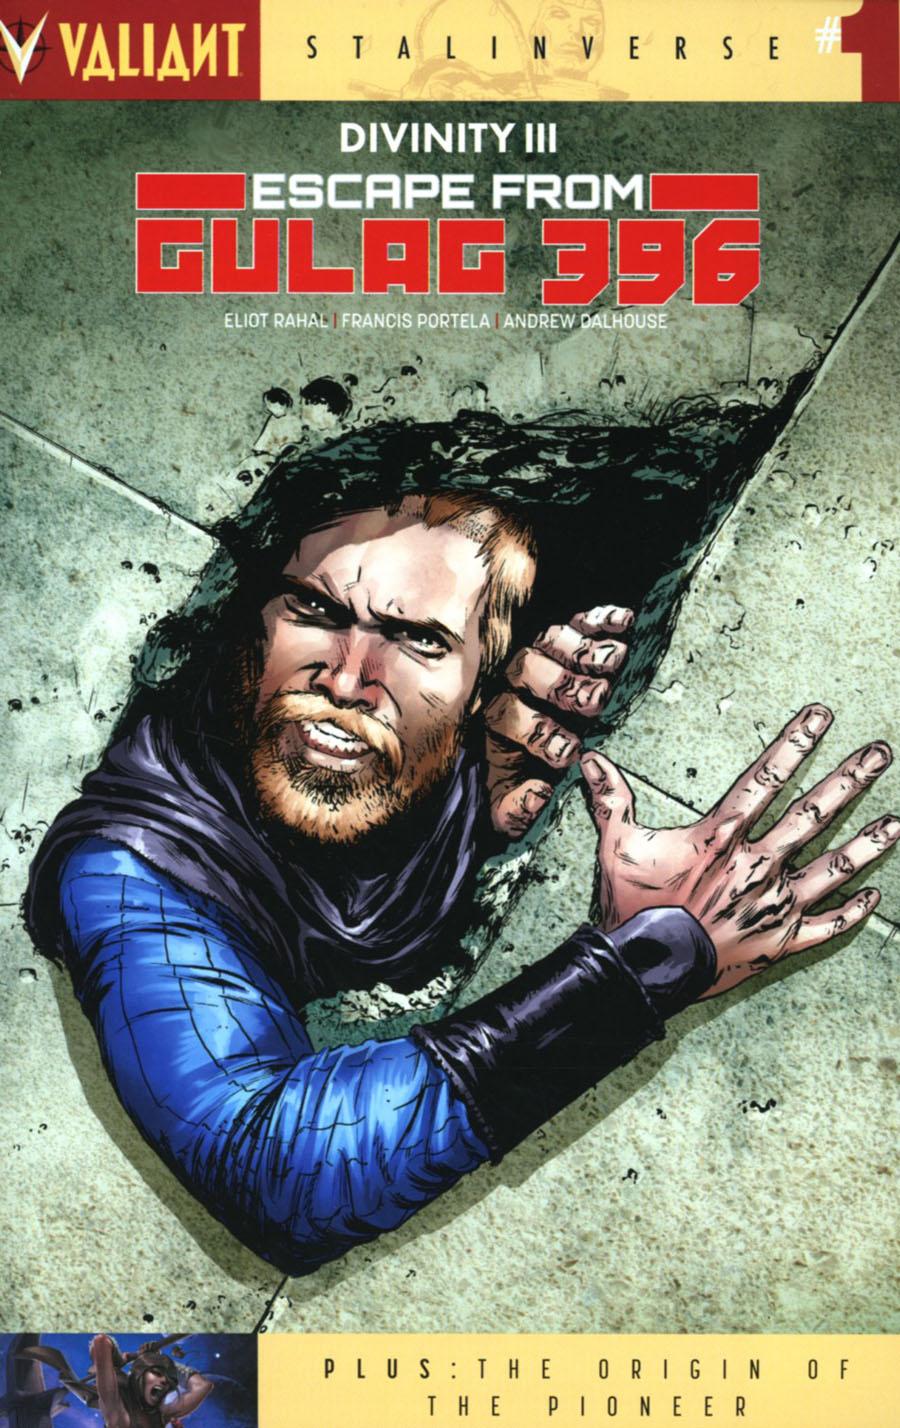 Divinity III Escape From Gulag 396 Vol. 1 #1